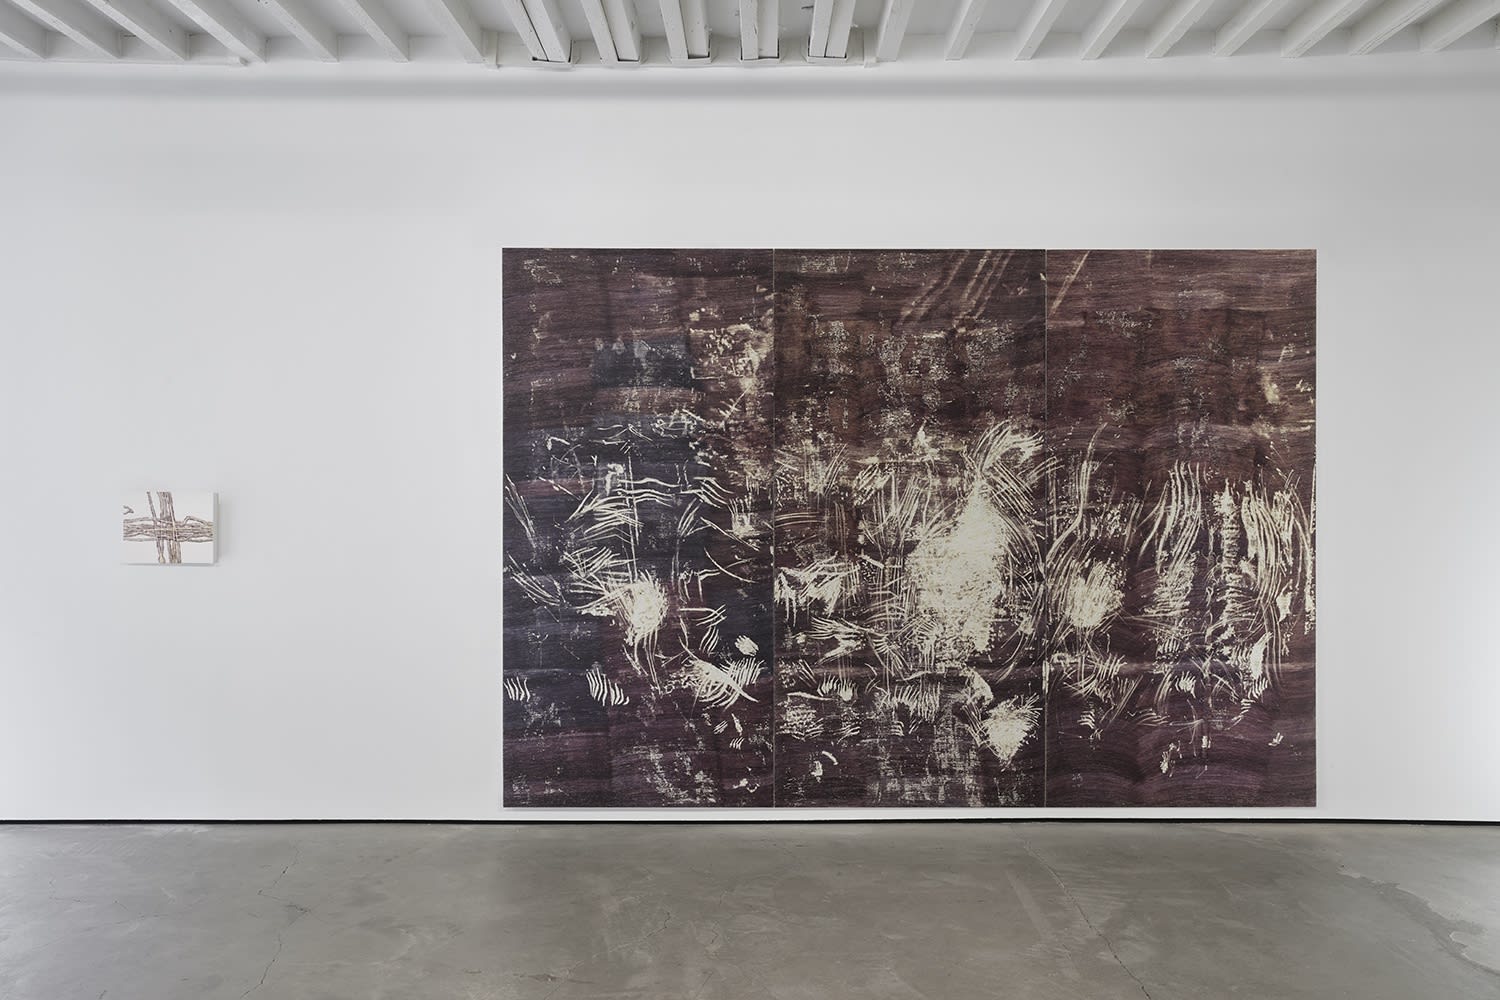 Installation view of Elise Nguyen Quoc's “Offering Body and Soul to A Radical Alterity